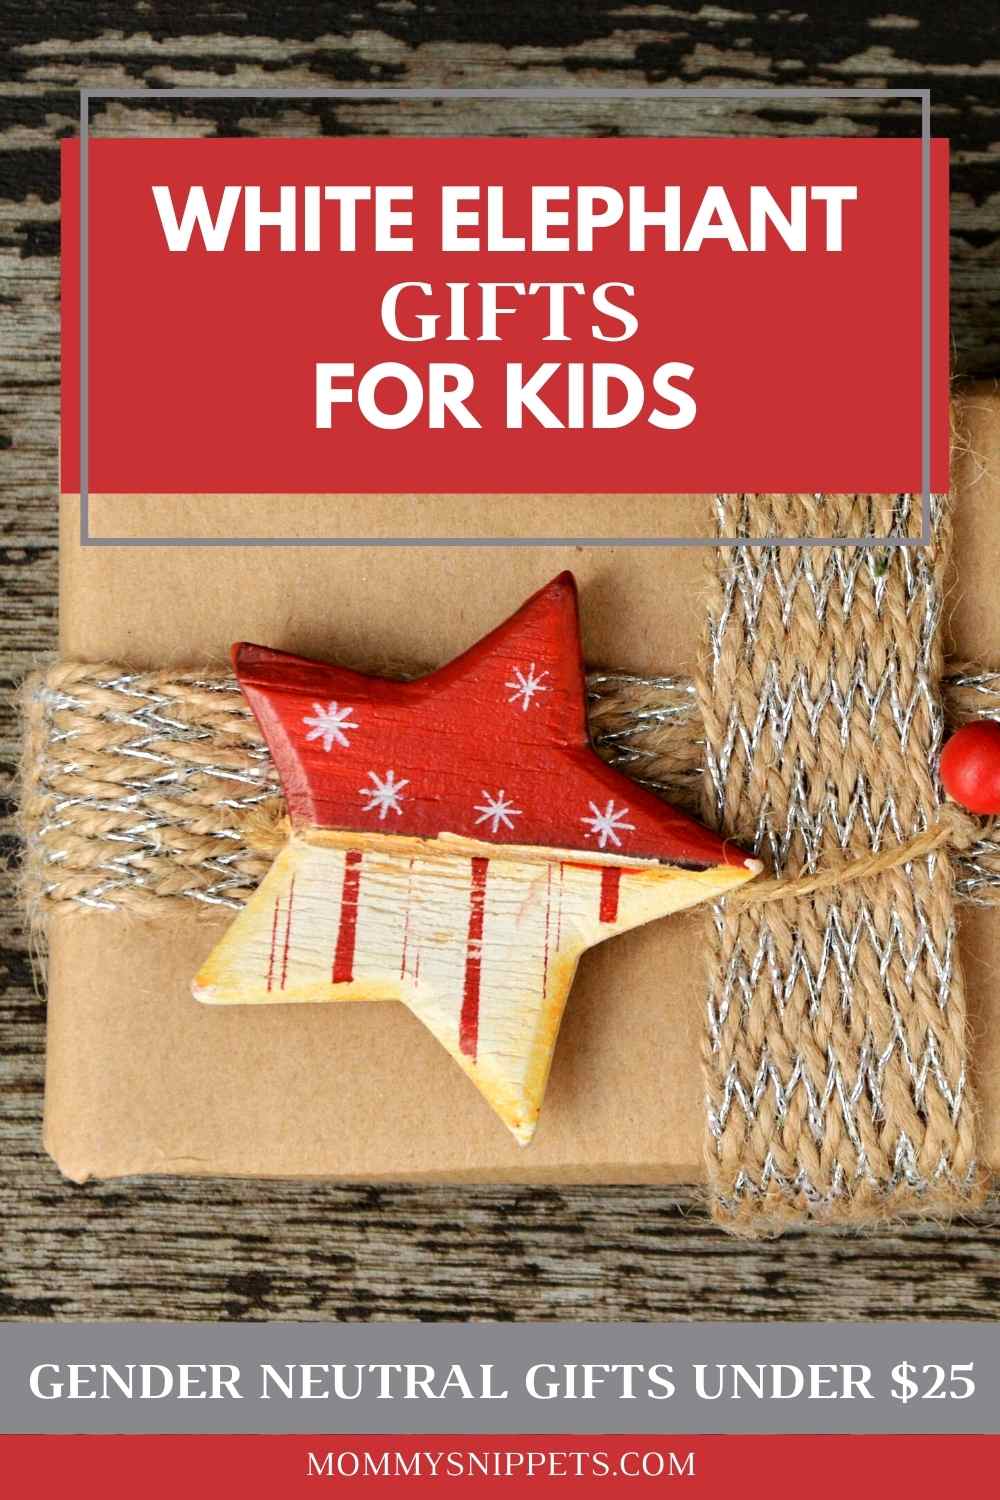 White Elephant Gifts for Kids- Gender Neutral Gifts and a $25 Budget